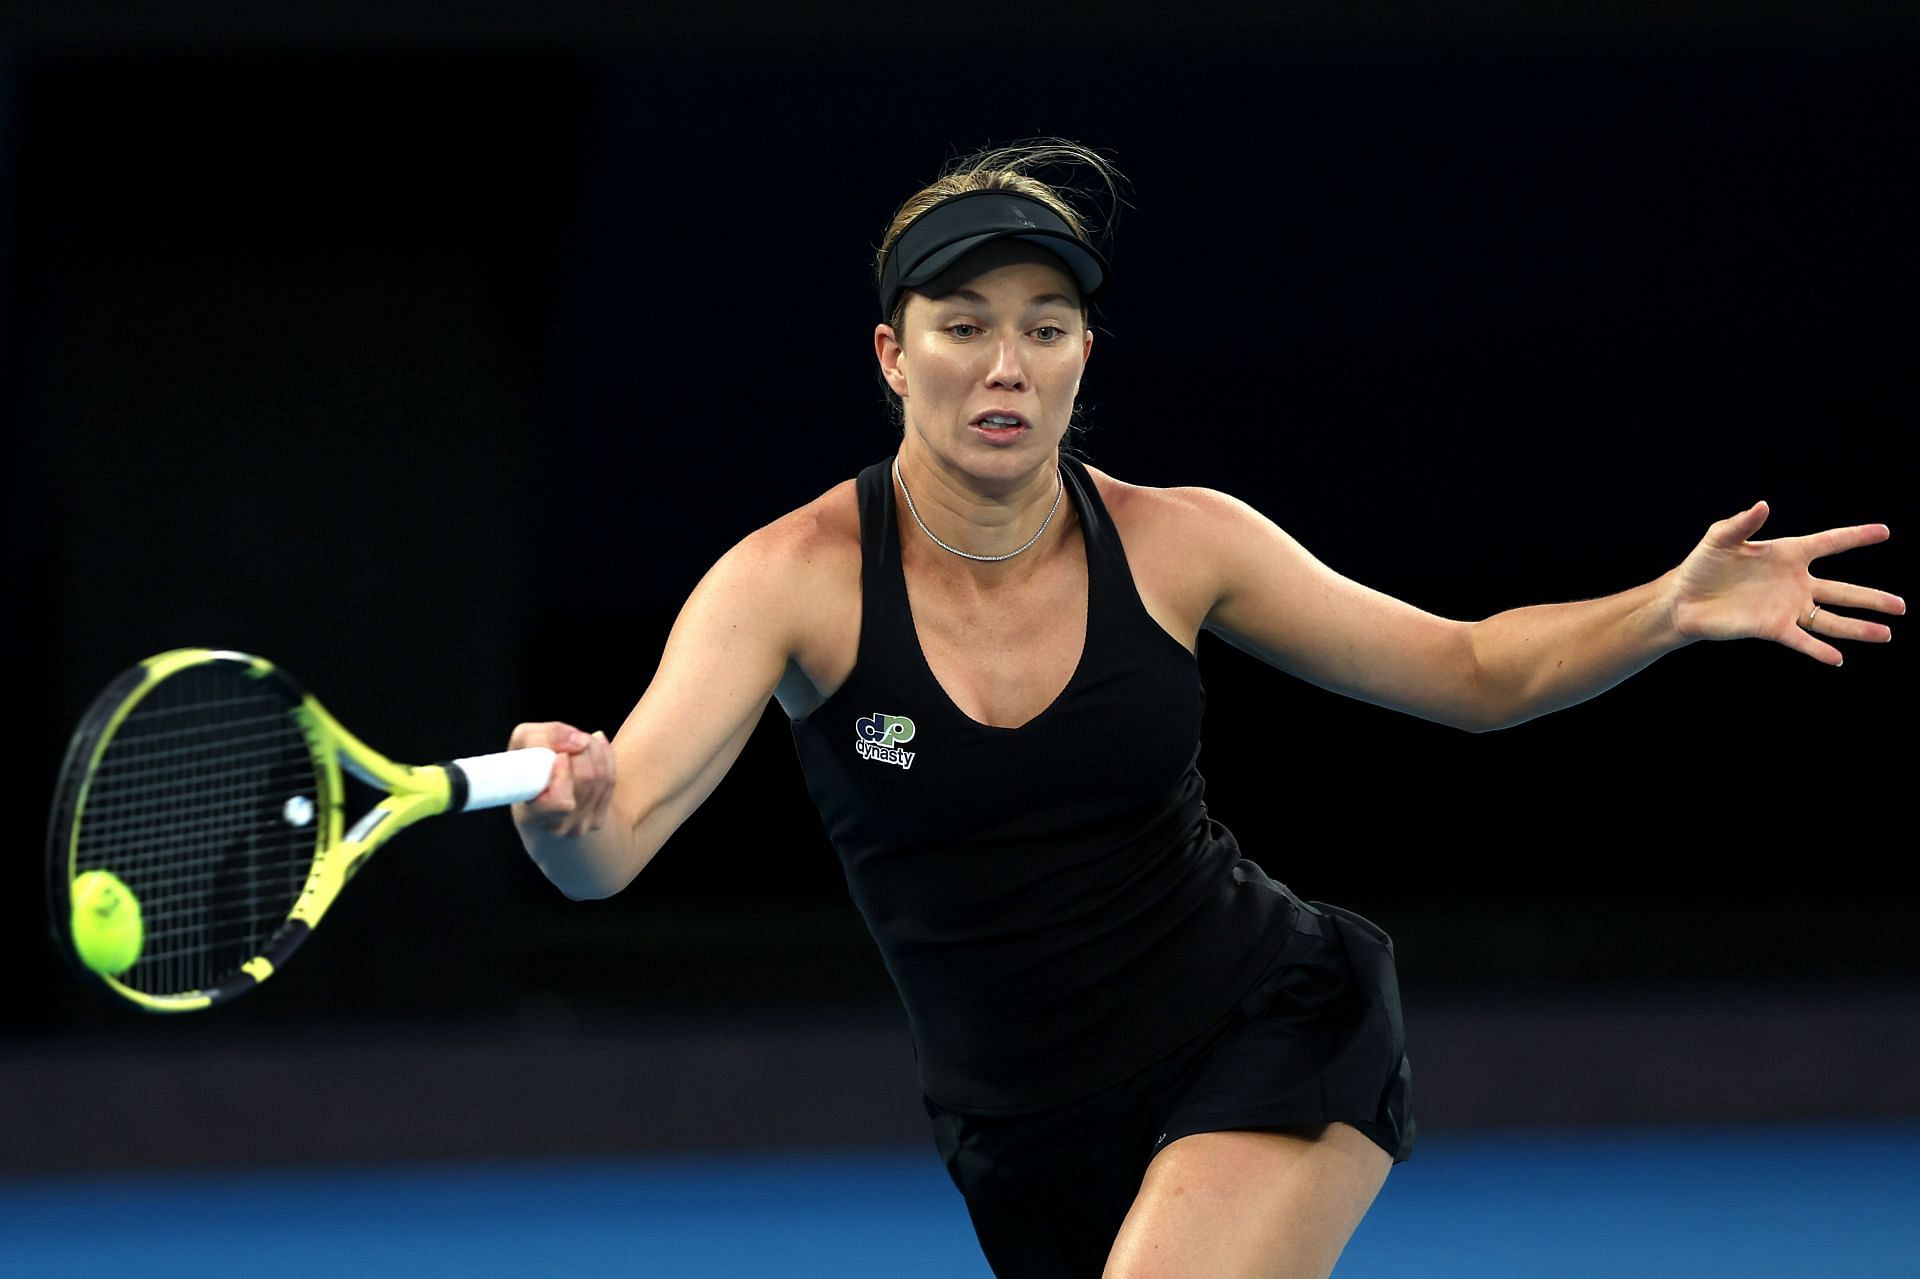 Danielle Collins in action at 2022 Australian Open